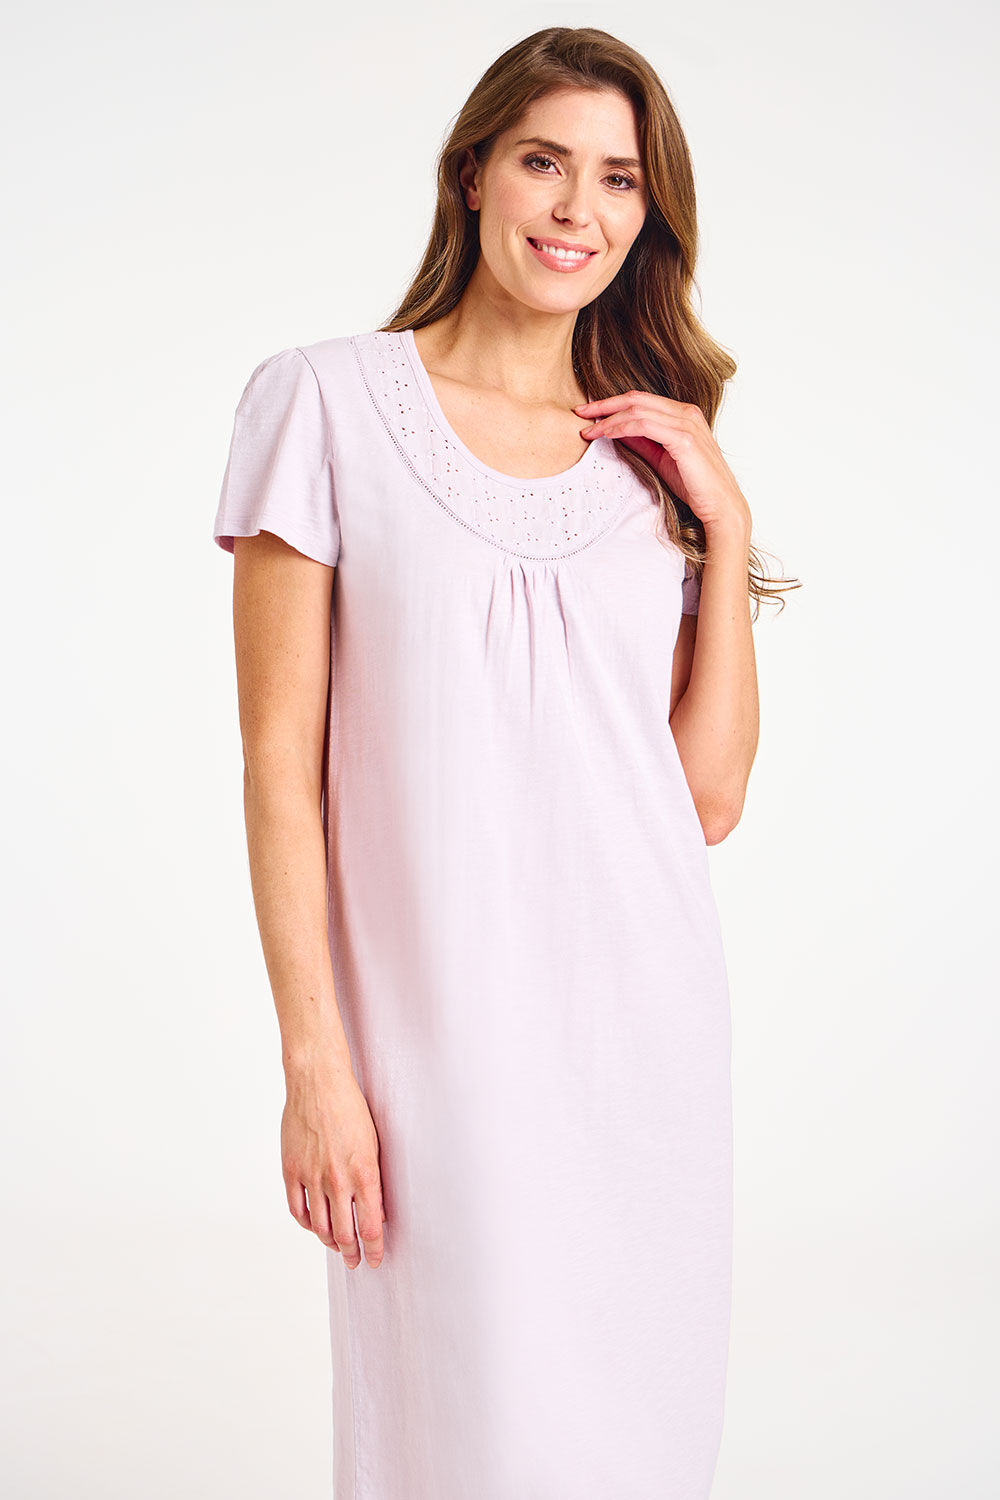 Bonmarche Lilac Short Sleeve Broderie and Jersey Nightdress, Size: 20